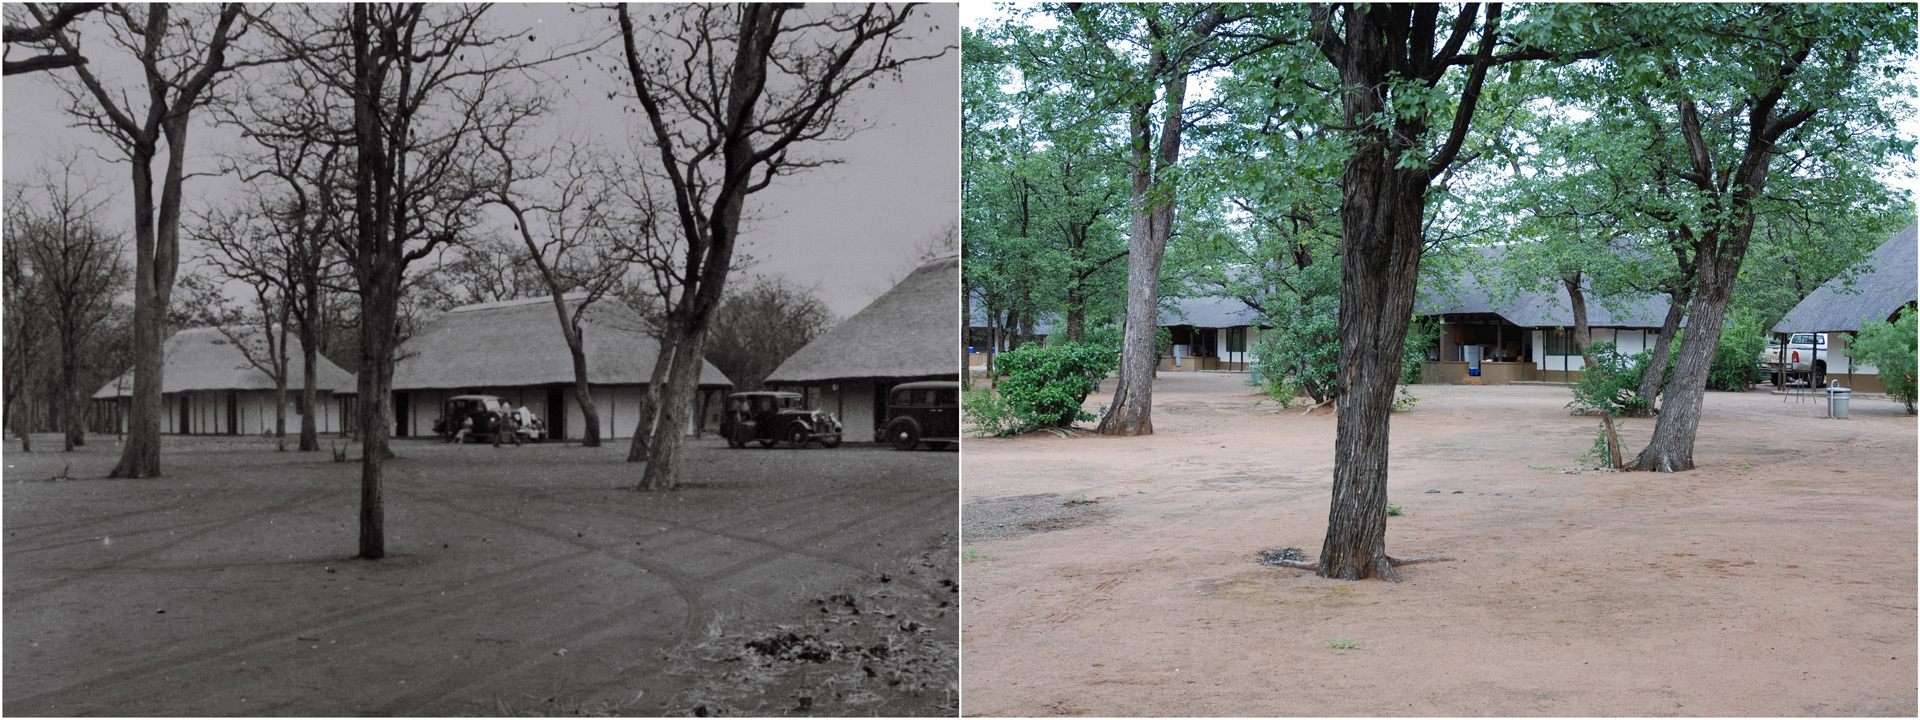 Then and now at Shingwedzi Camp in 1935 and present